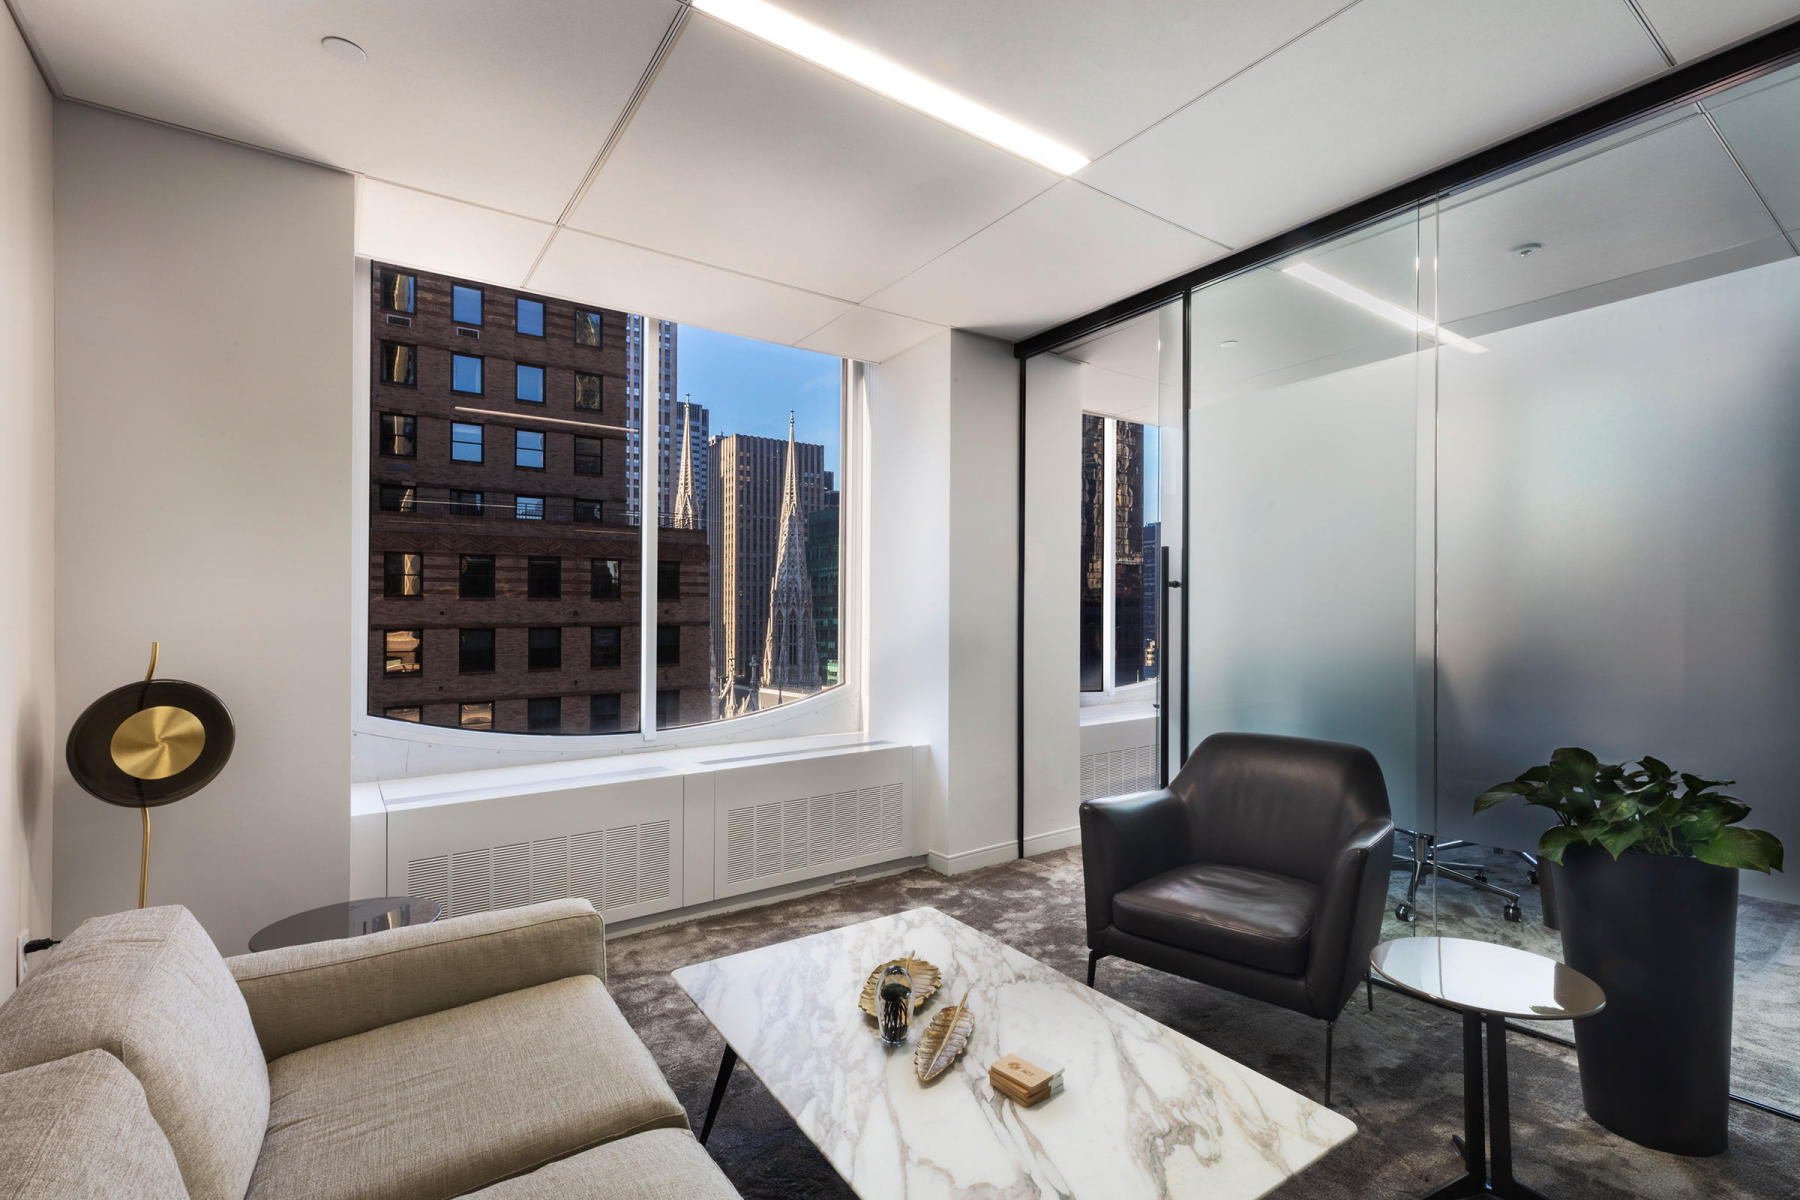 One of the NYC views as seen from ACT COMMODITIES conference room with a view of   St. Patrick's Cathedral situated on Madison Avenue - NYC. : Miscellanous Projects : New York NY Architectural Photographer | Interior and Exterior